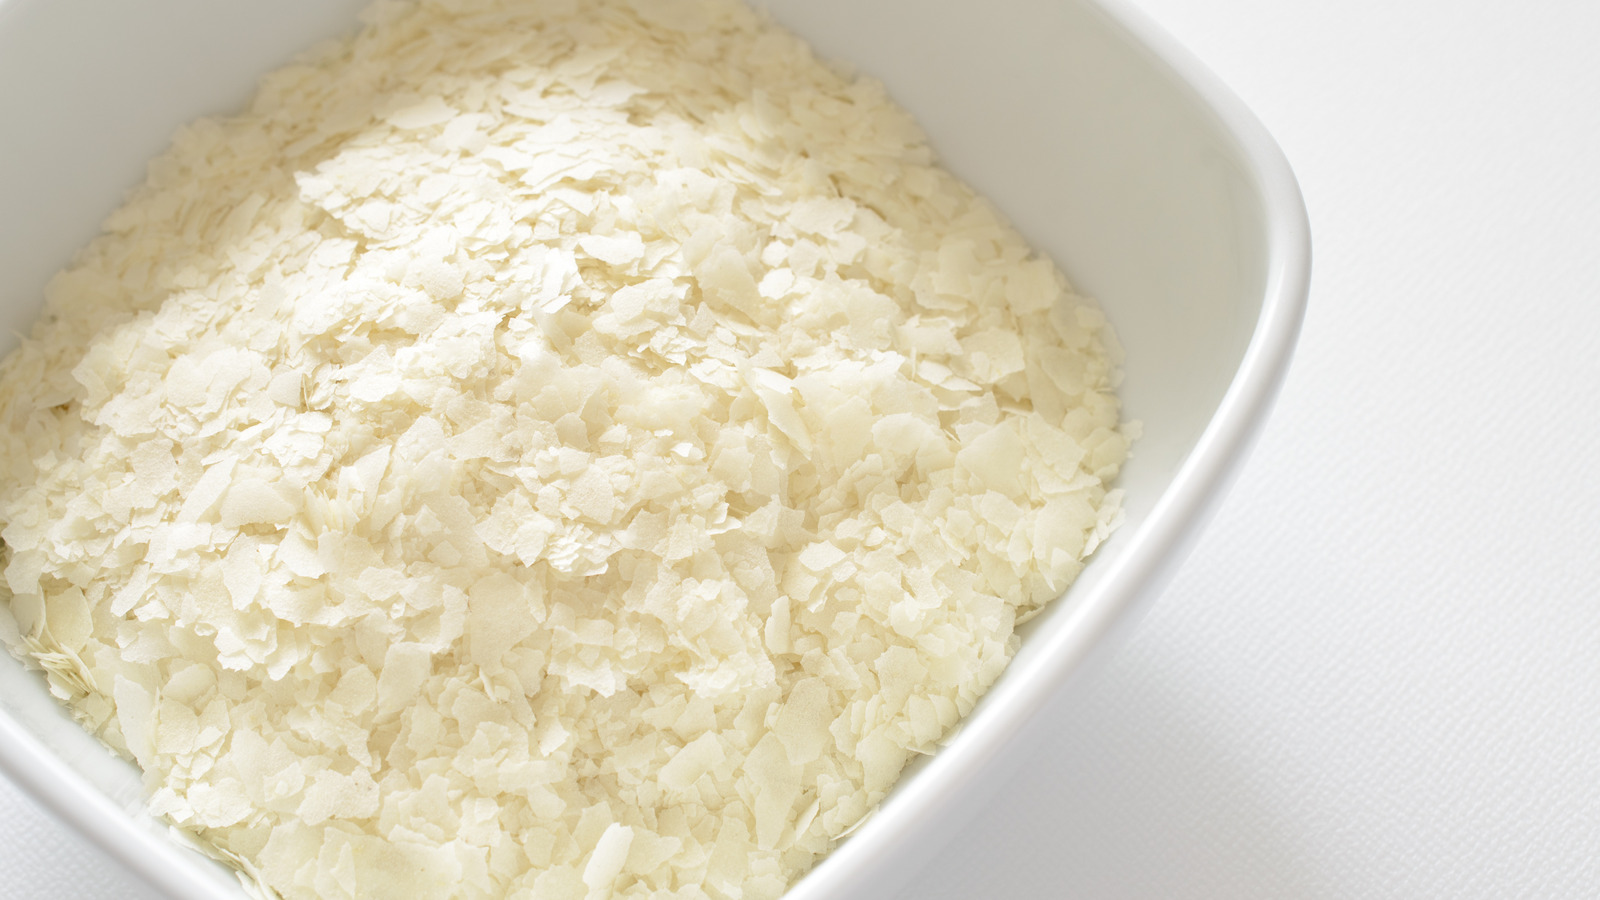 What Are Instant Mashed Potato Flakes Made Of?